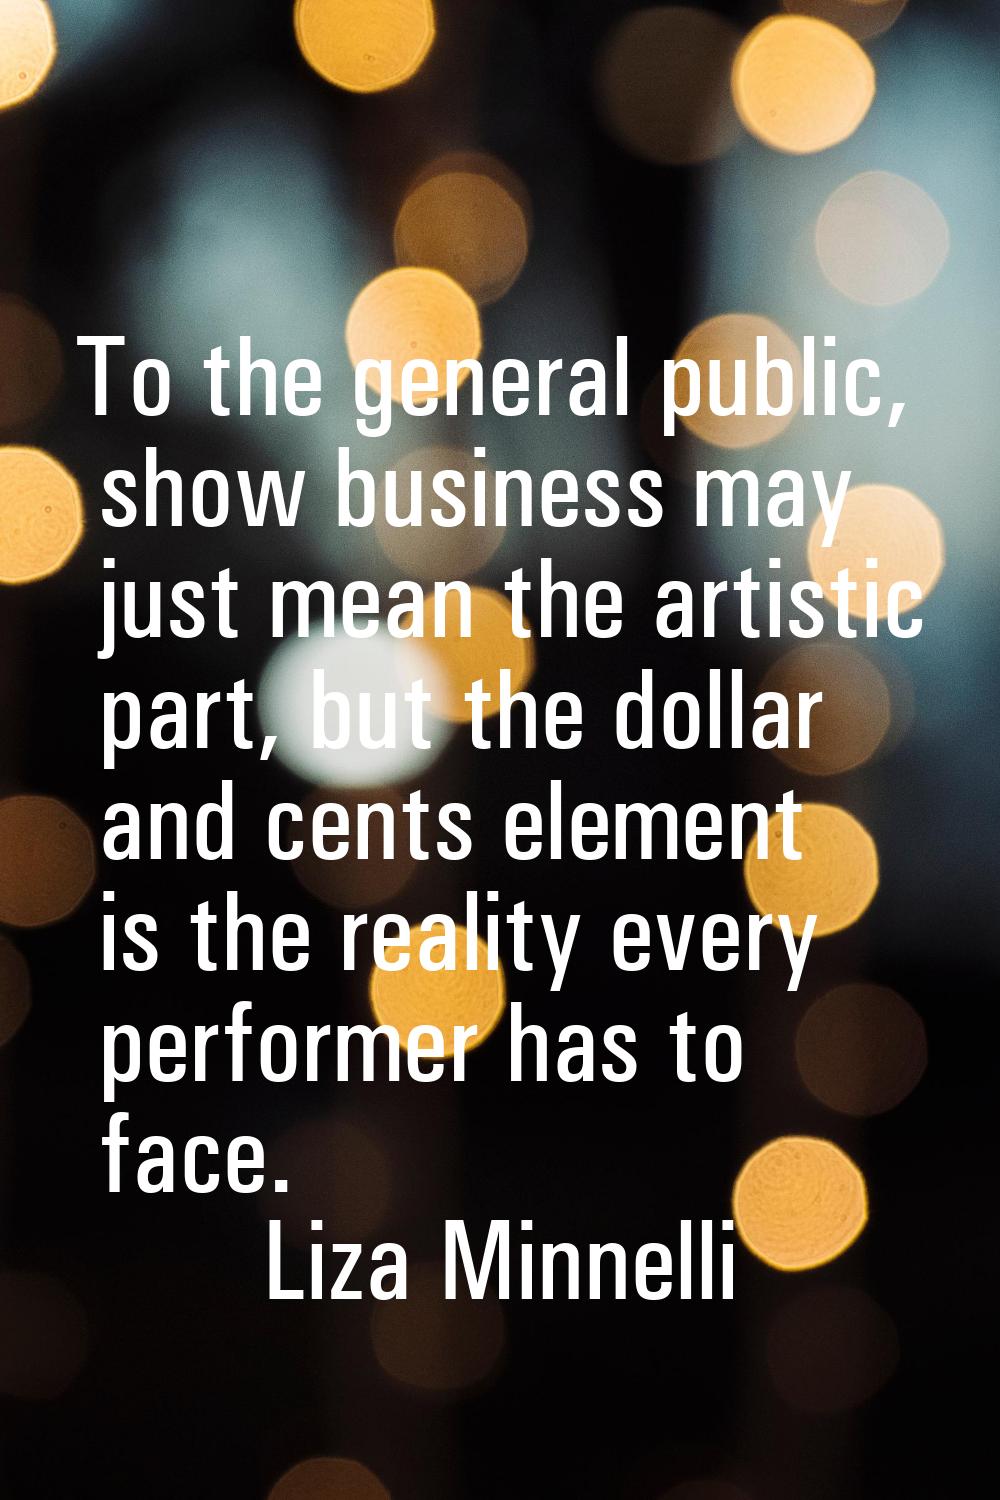 To the general public, show business may just mean the artistic part, but the dollar and cents elem